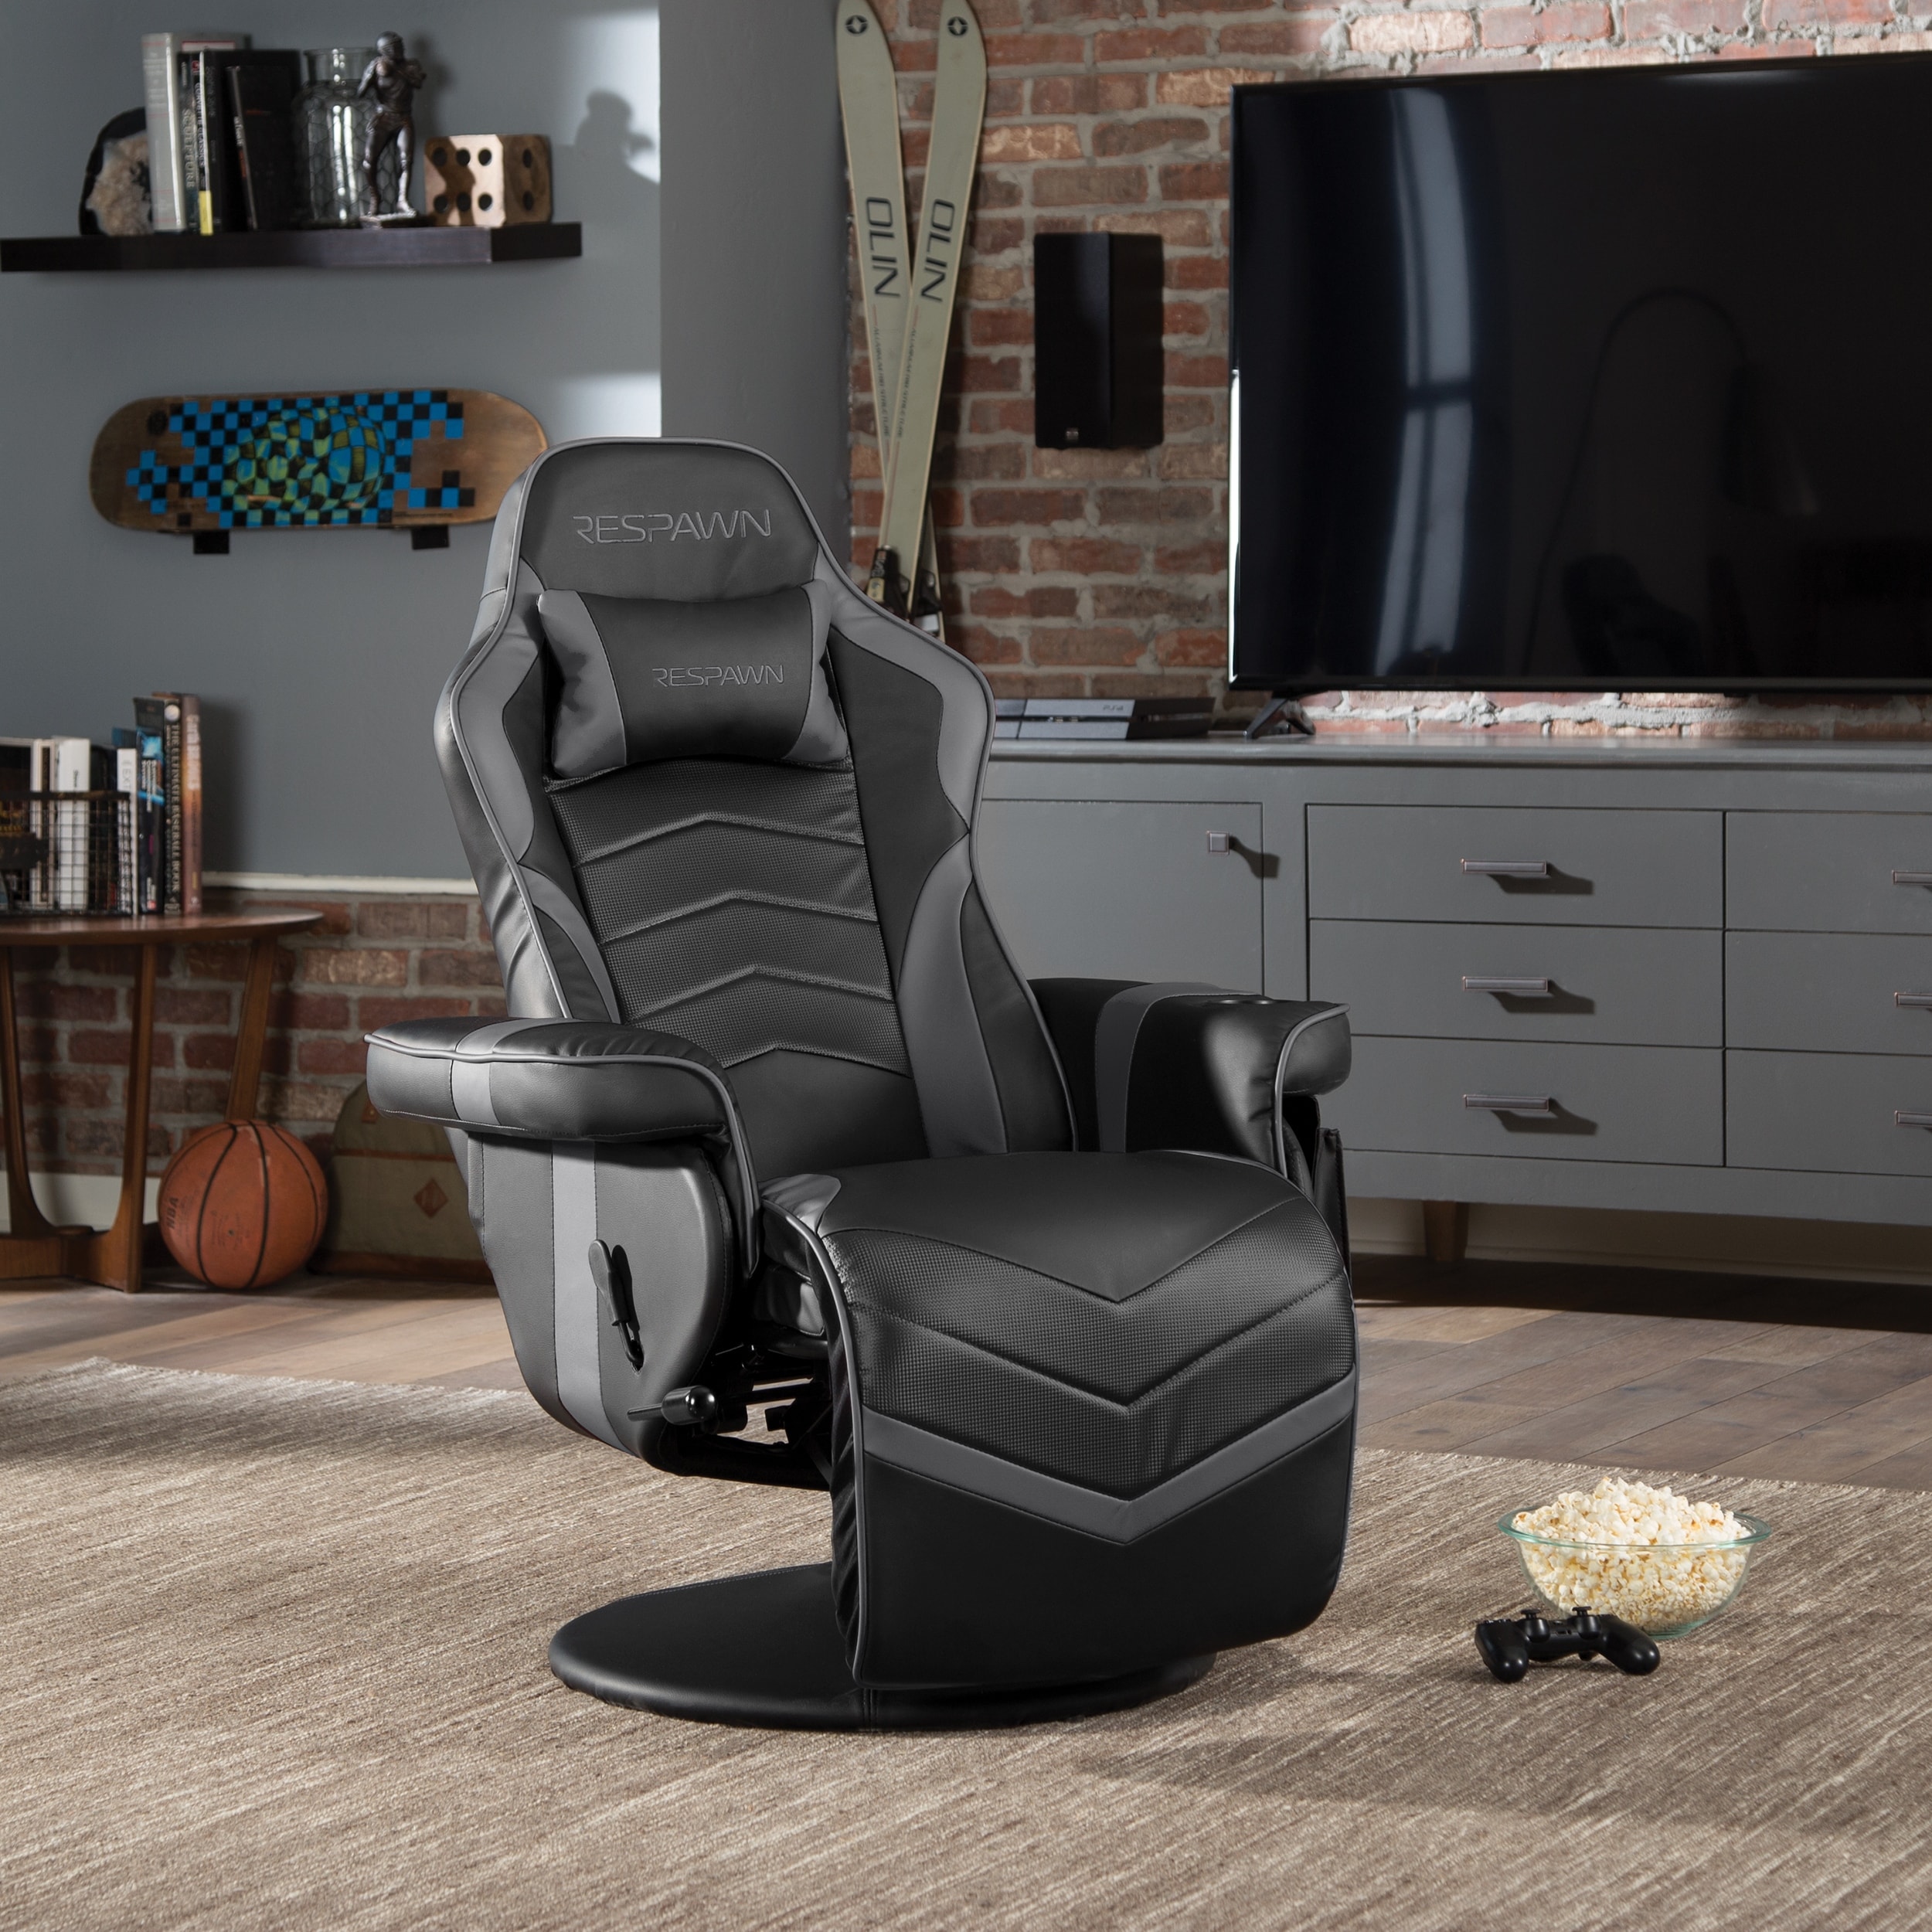 Respawn 900 Racing Style Gaming Recliner Reclining Gaming Chair Rsp 900 Overstock 27389451